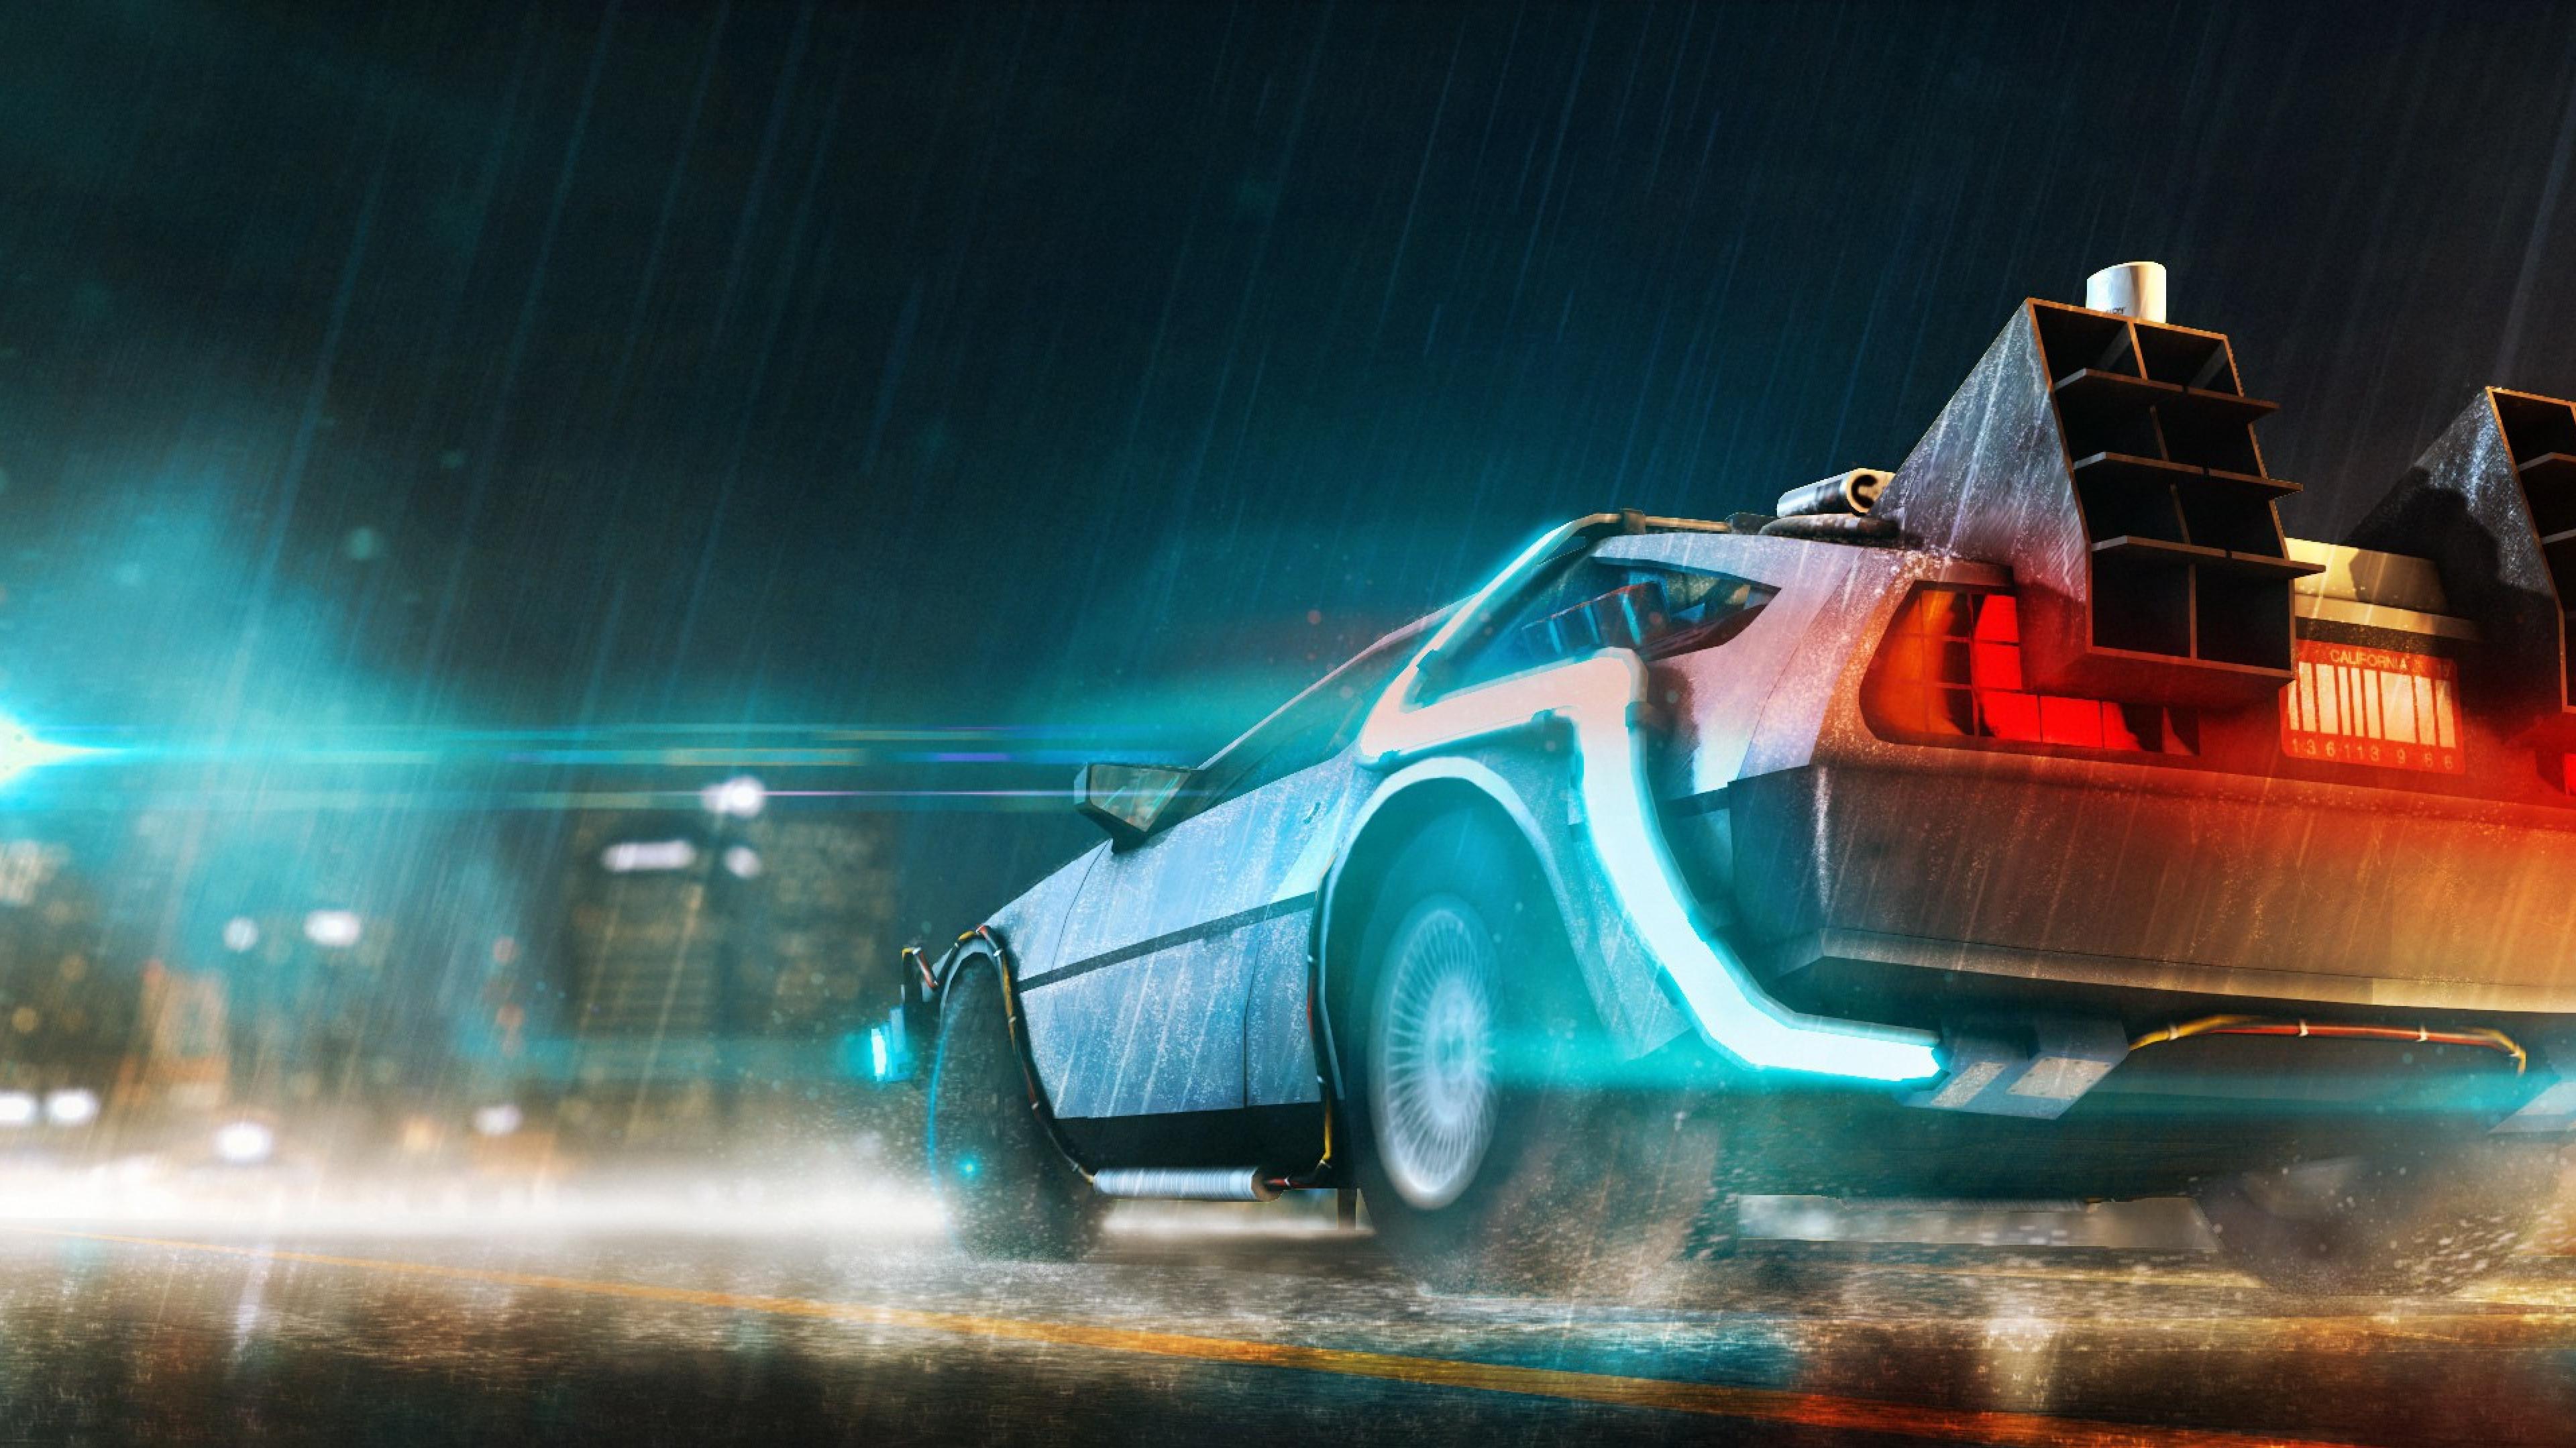 4K back to the future wallpapers Wallpapers   4k Wallpapers